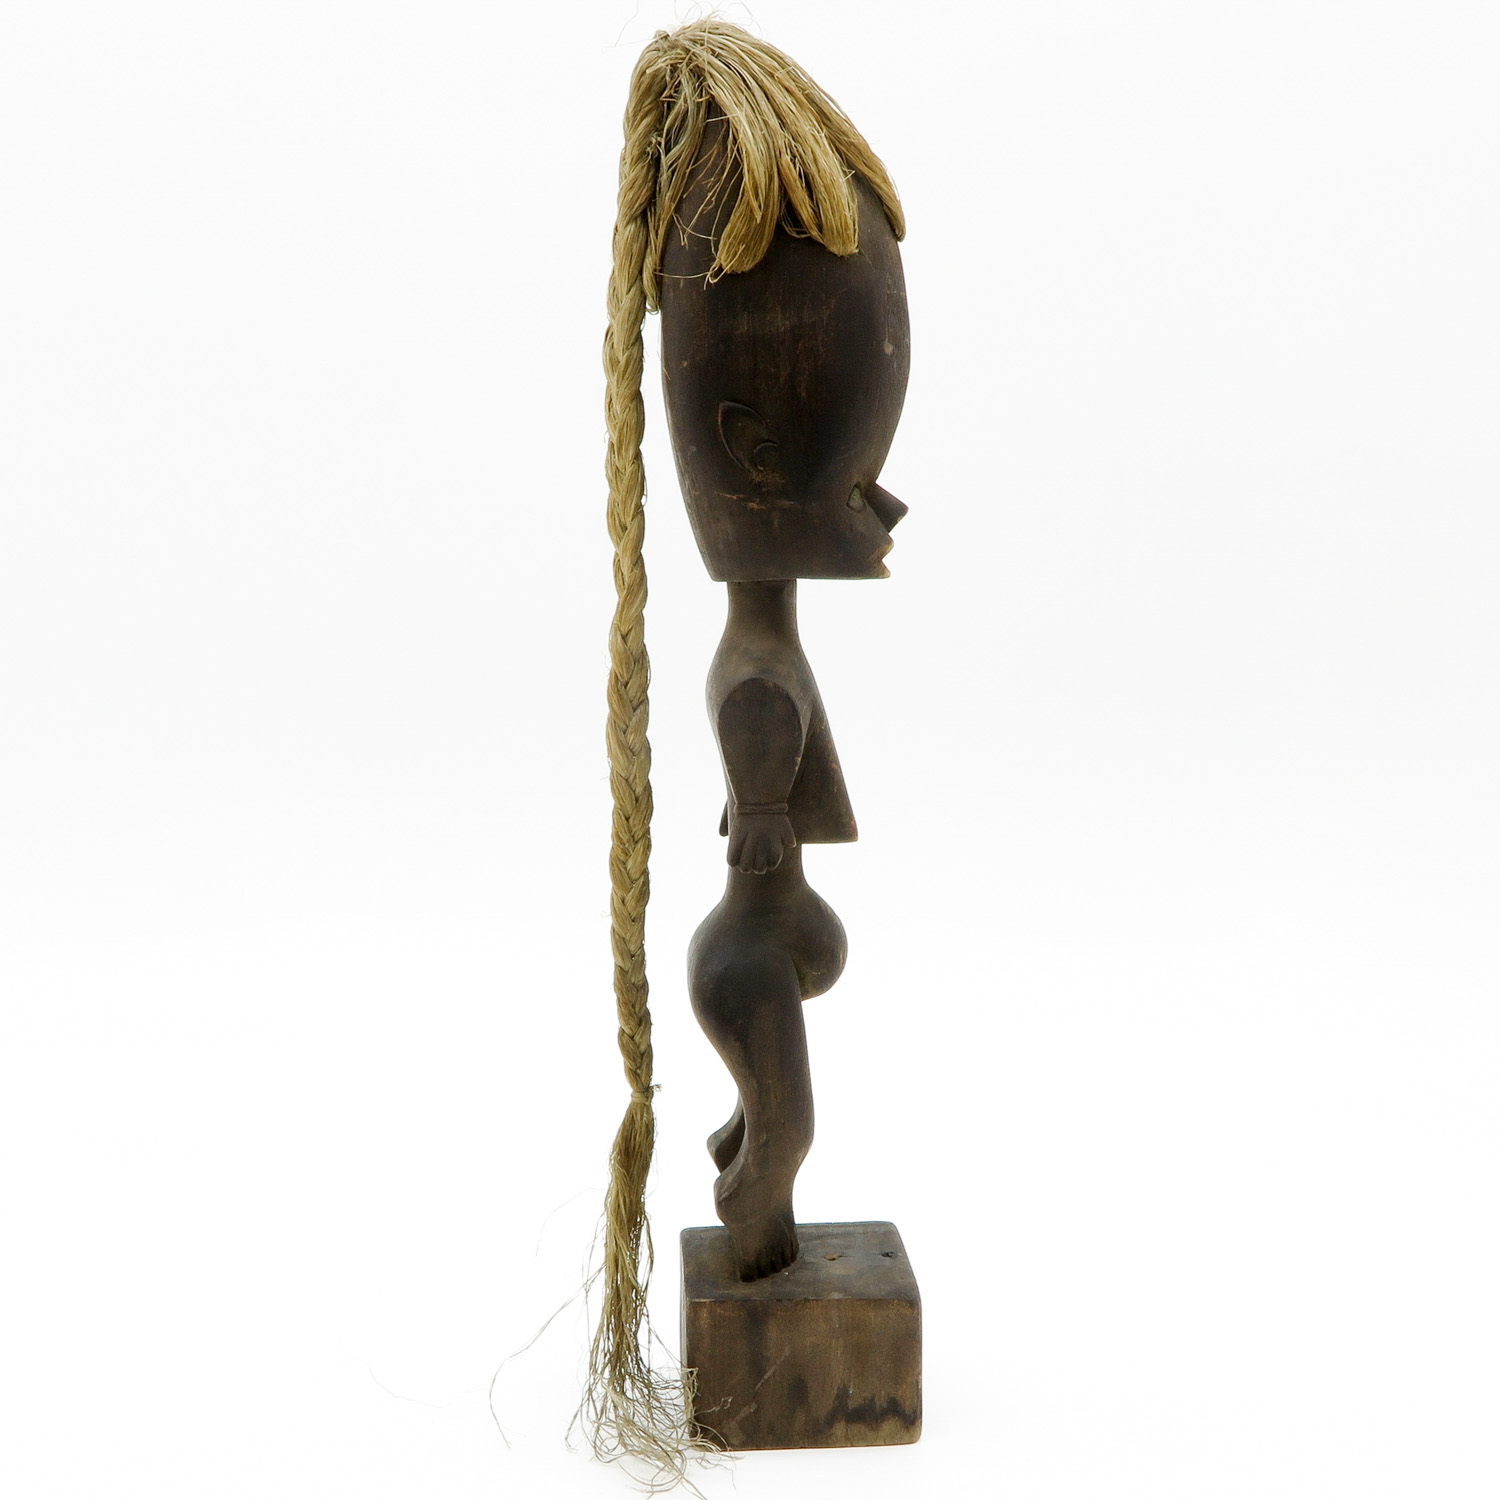 Ethnographic Carved Wood Sculpture - Image 4 of 5